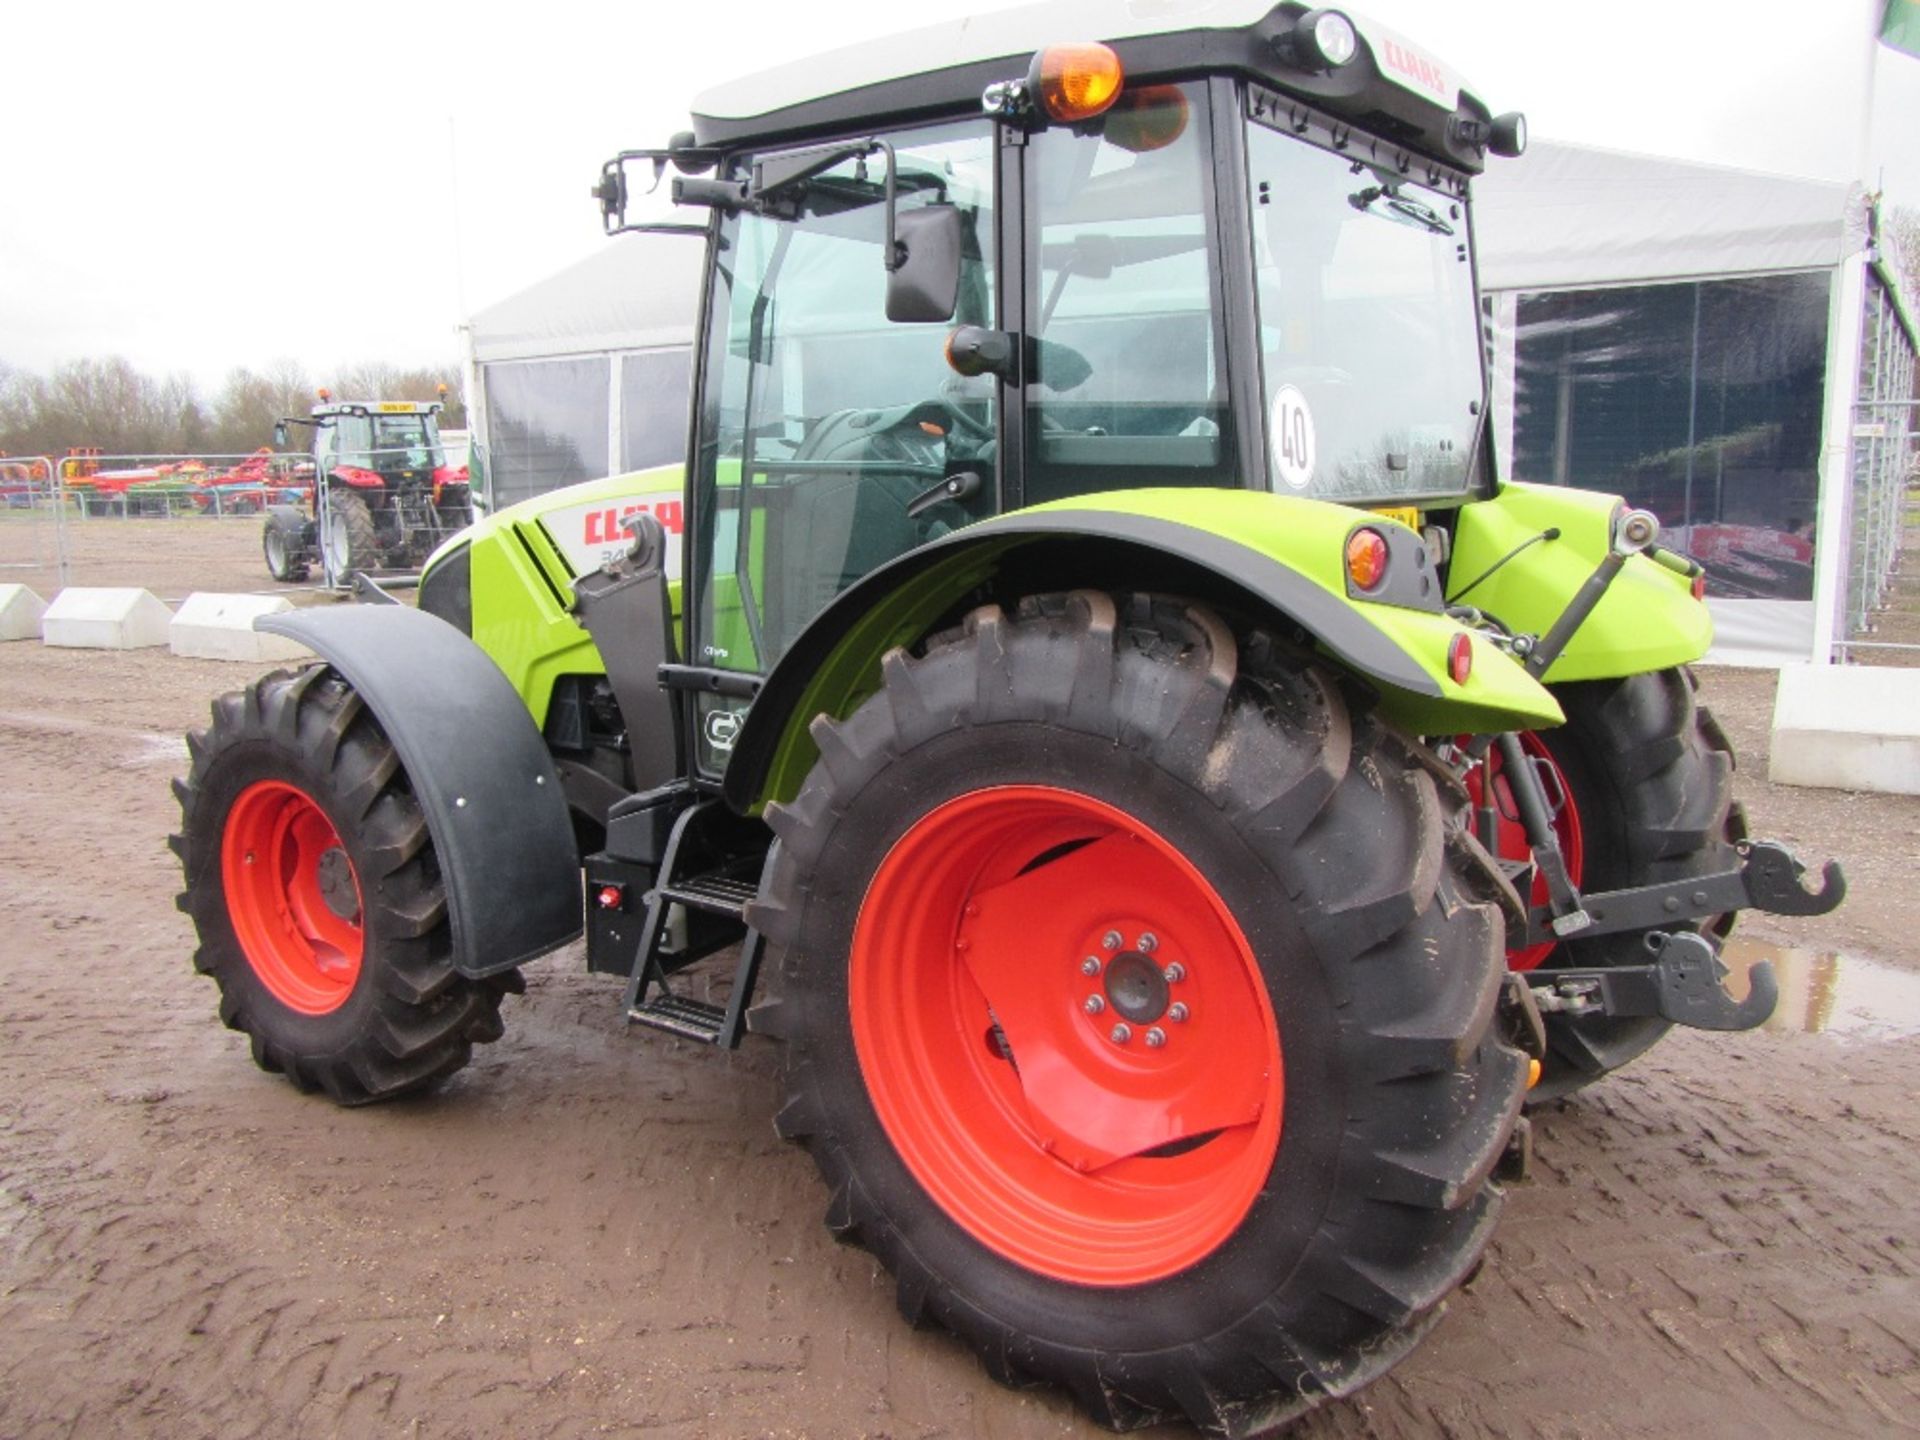 2014 Claas Axos 340C Tractor c/w Loader 500 Hrs Reg No GN64 CZF Ser No 2220597 - Image 9 of 17